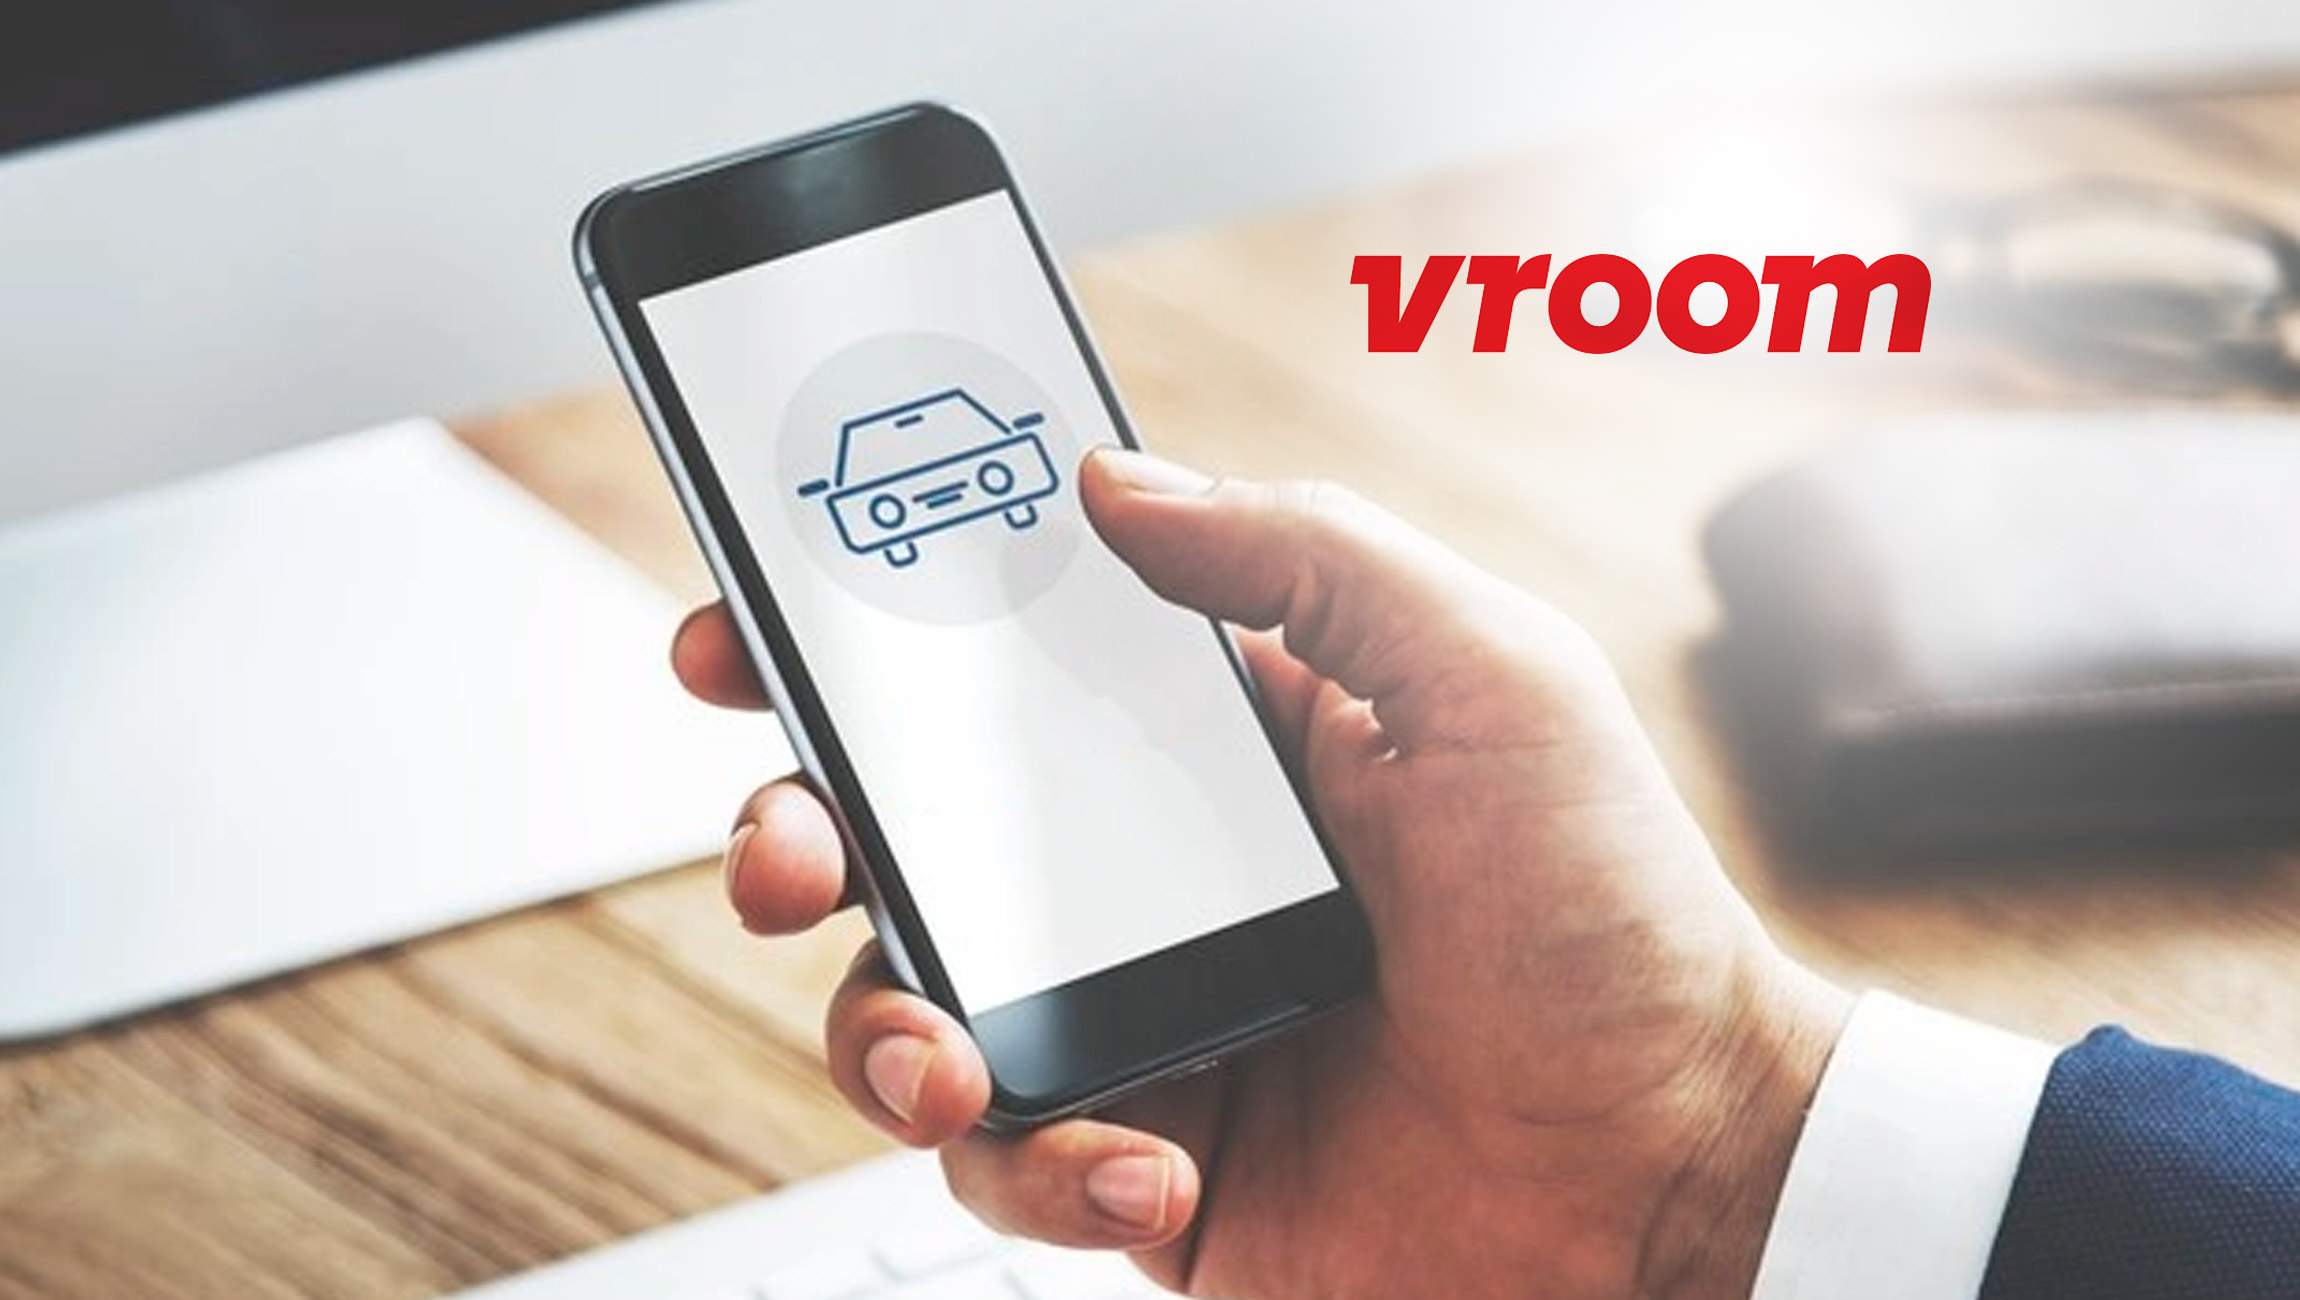 Online-Automotive-Retailer-Vroom-Announces-First-Extended-Mile-Hub-in-Orlando_-Offering-More-Personalized-Concierge-Experience-for-Florida-Customers